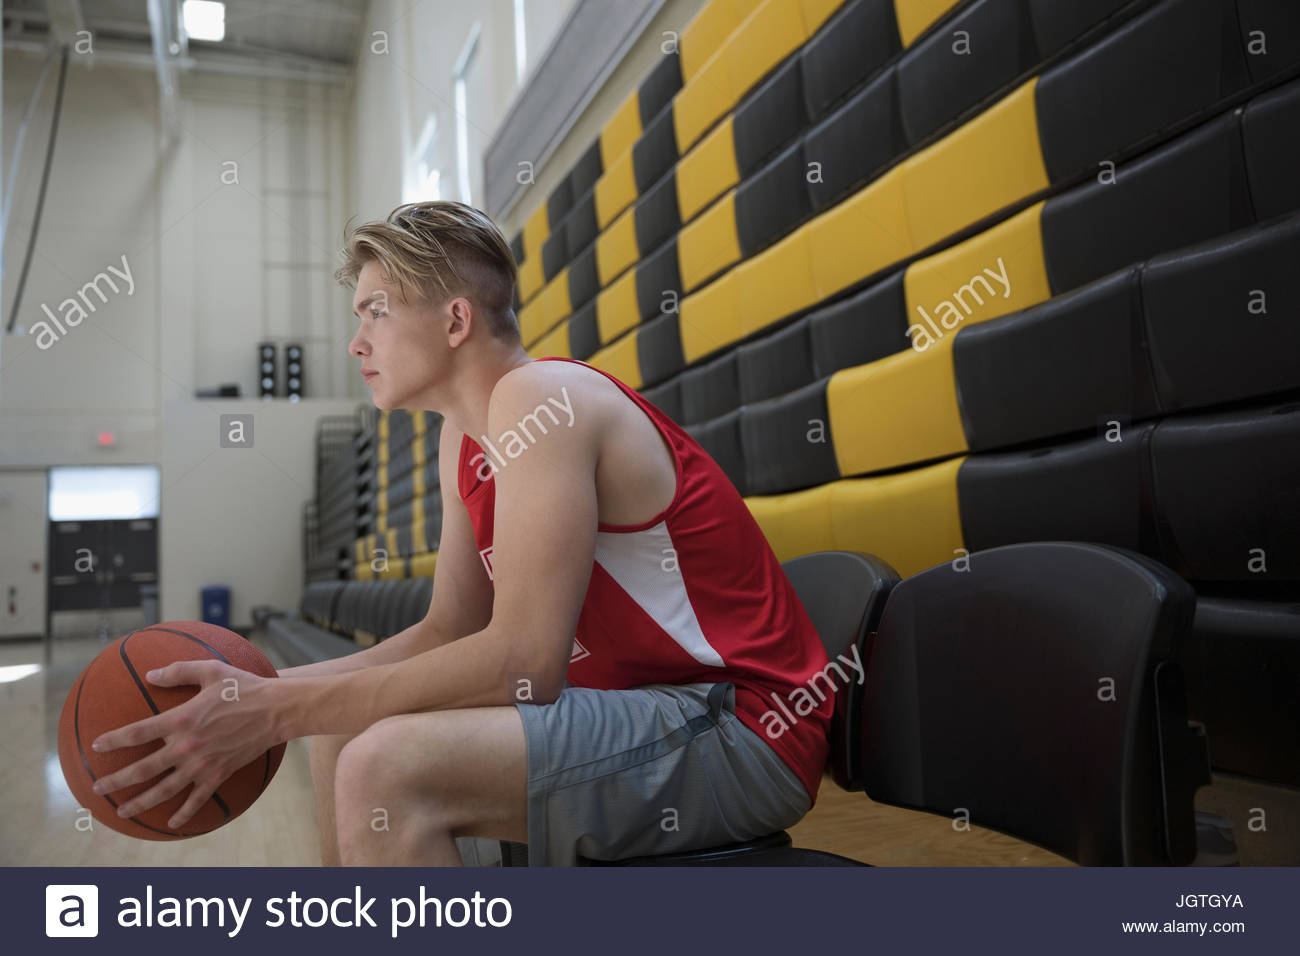 Serious male college basketball player sitting on bench in gymnasium Stock Photo